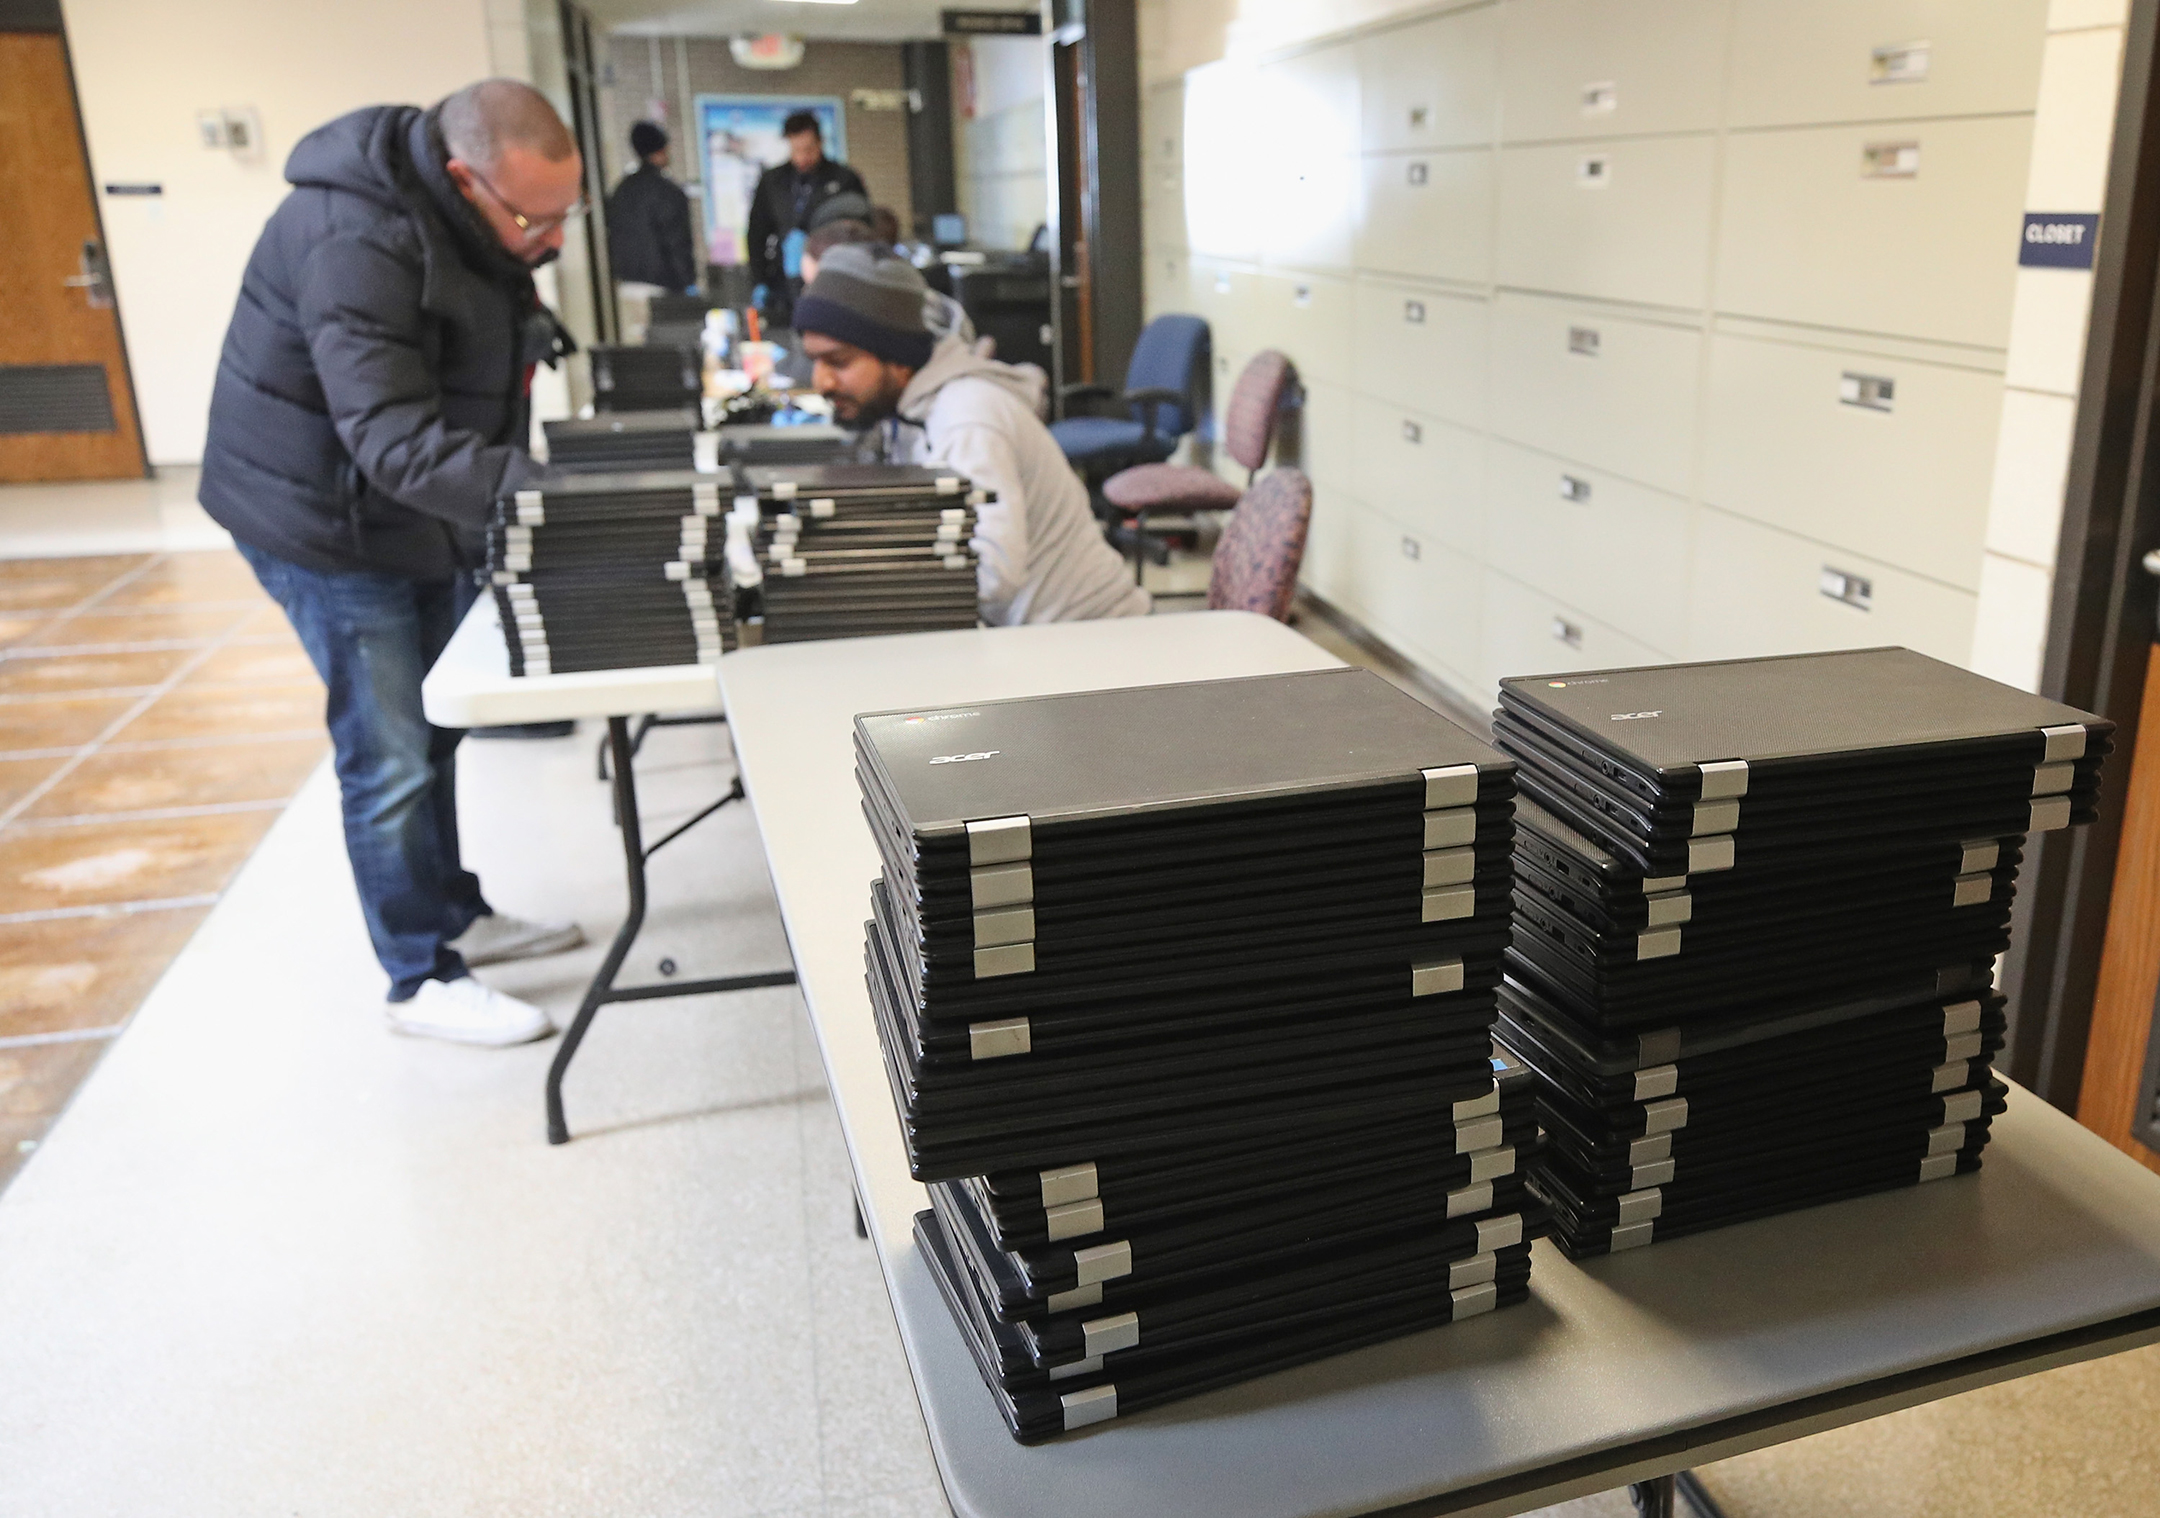 Photograph of a stack of laptop computers in the foreground, with an educator helping a parent check out a computer in the background